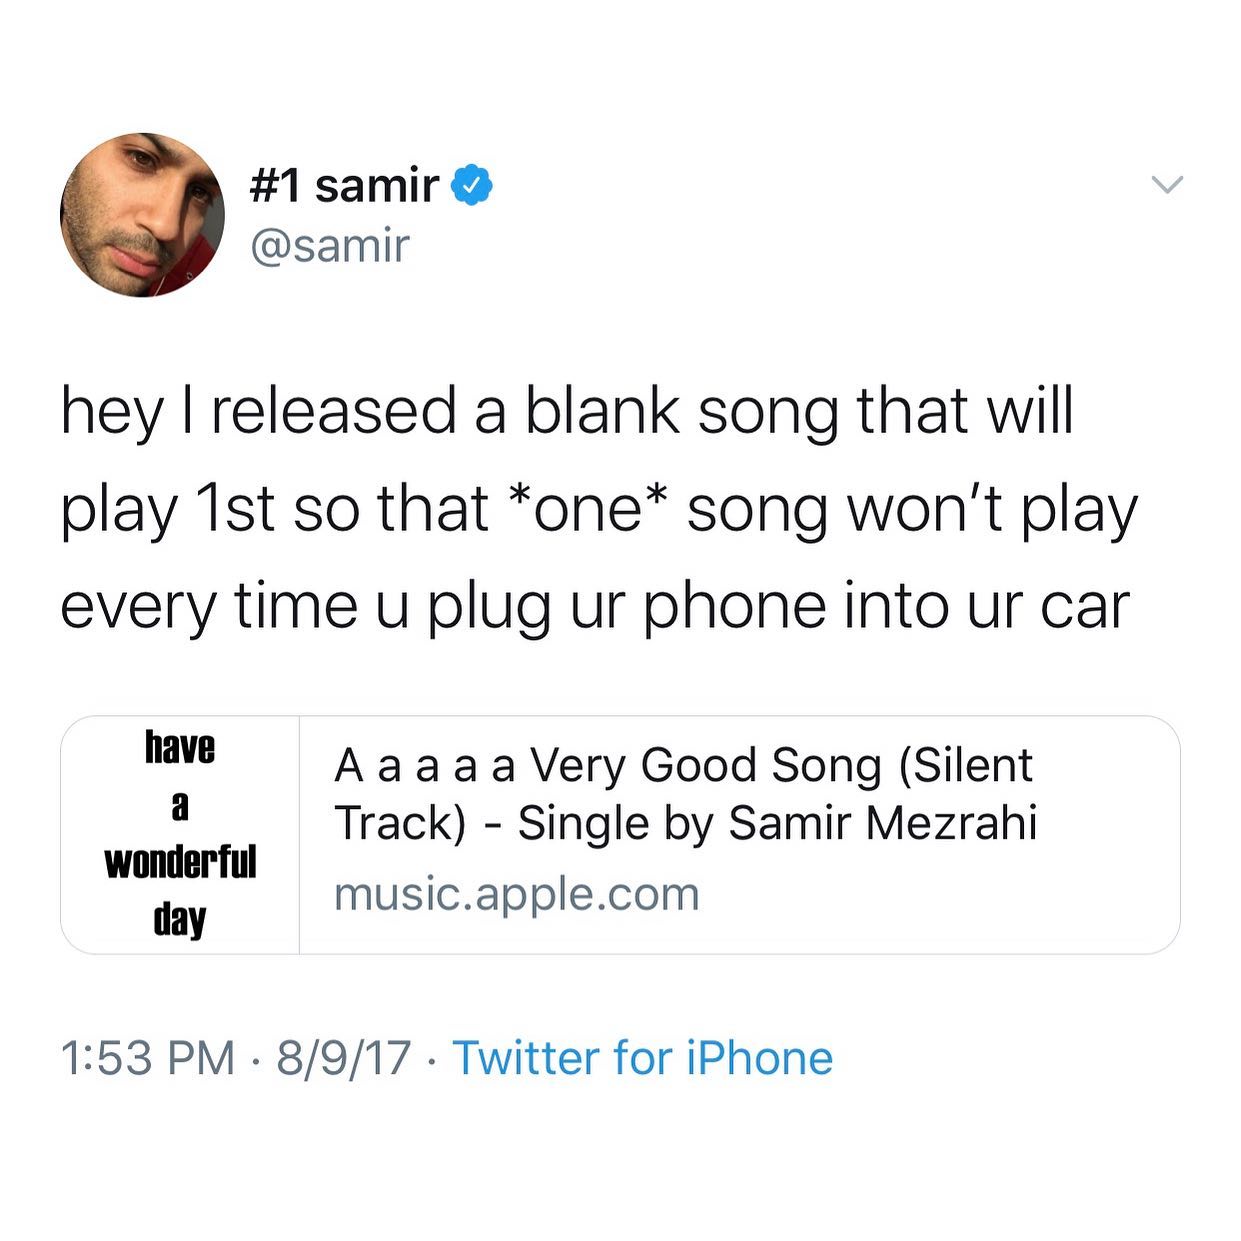 dank memes - twitter - document - samir hey I released a blank song that will play 1st so that one song won't play every time u plug ur phone into ur car have a A aa a a Very Good Song Silent Track Single by Samir Mezrahi music.apple.com wonderful day 891